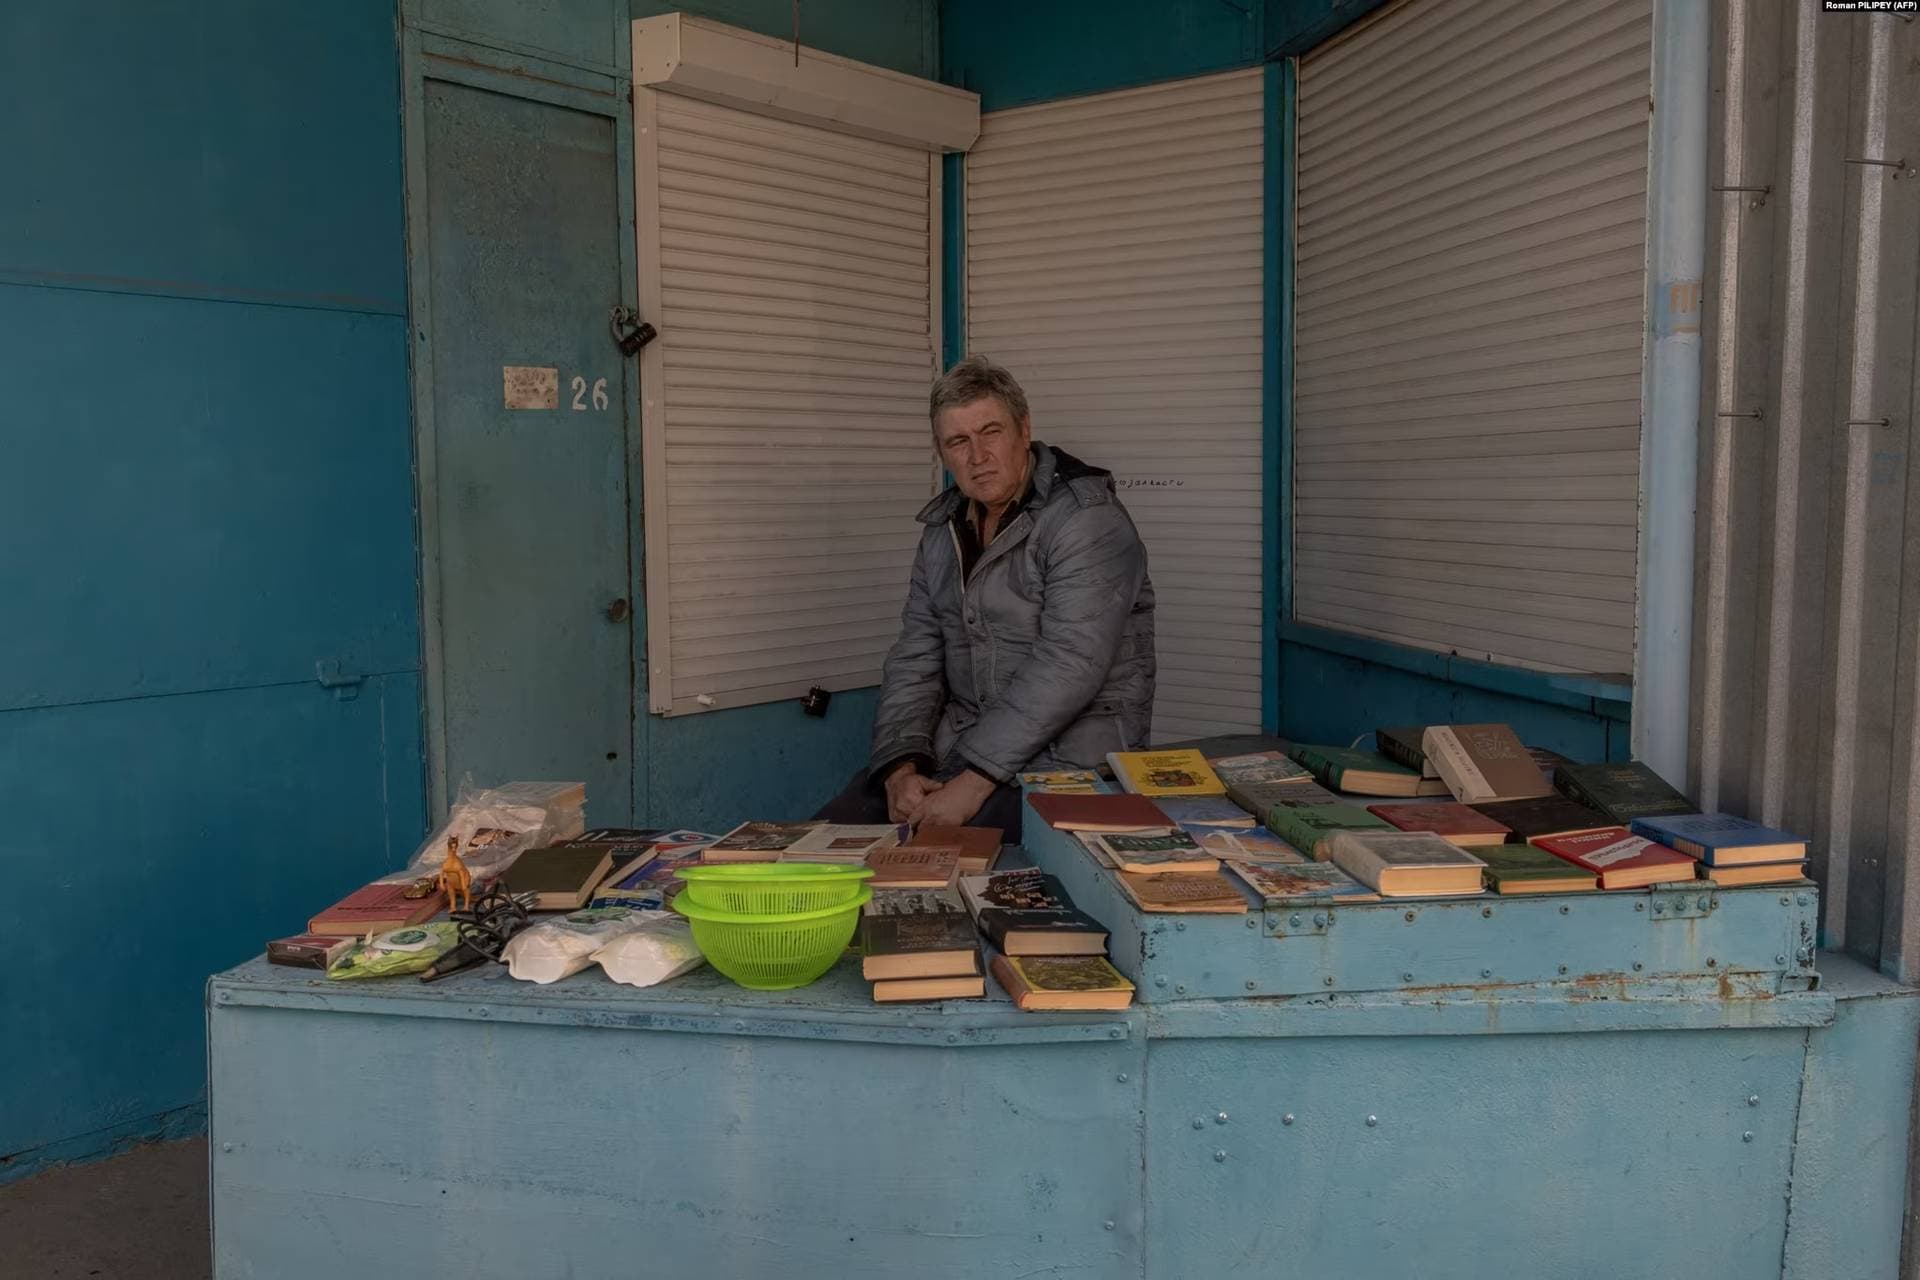 A man sells books at a market in Kherson